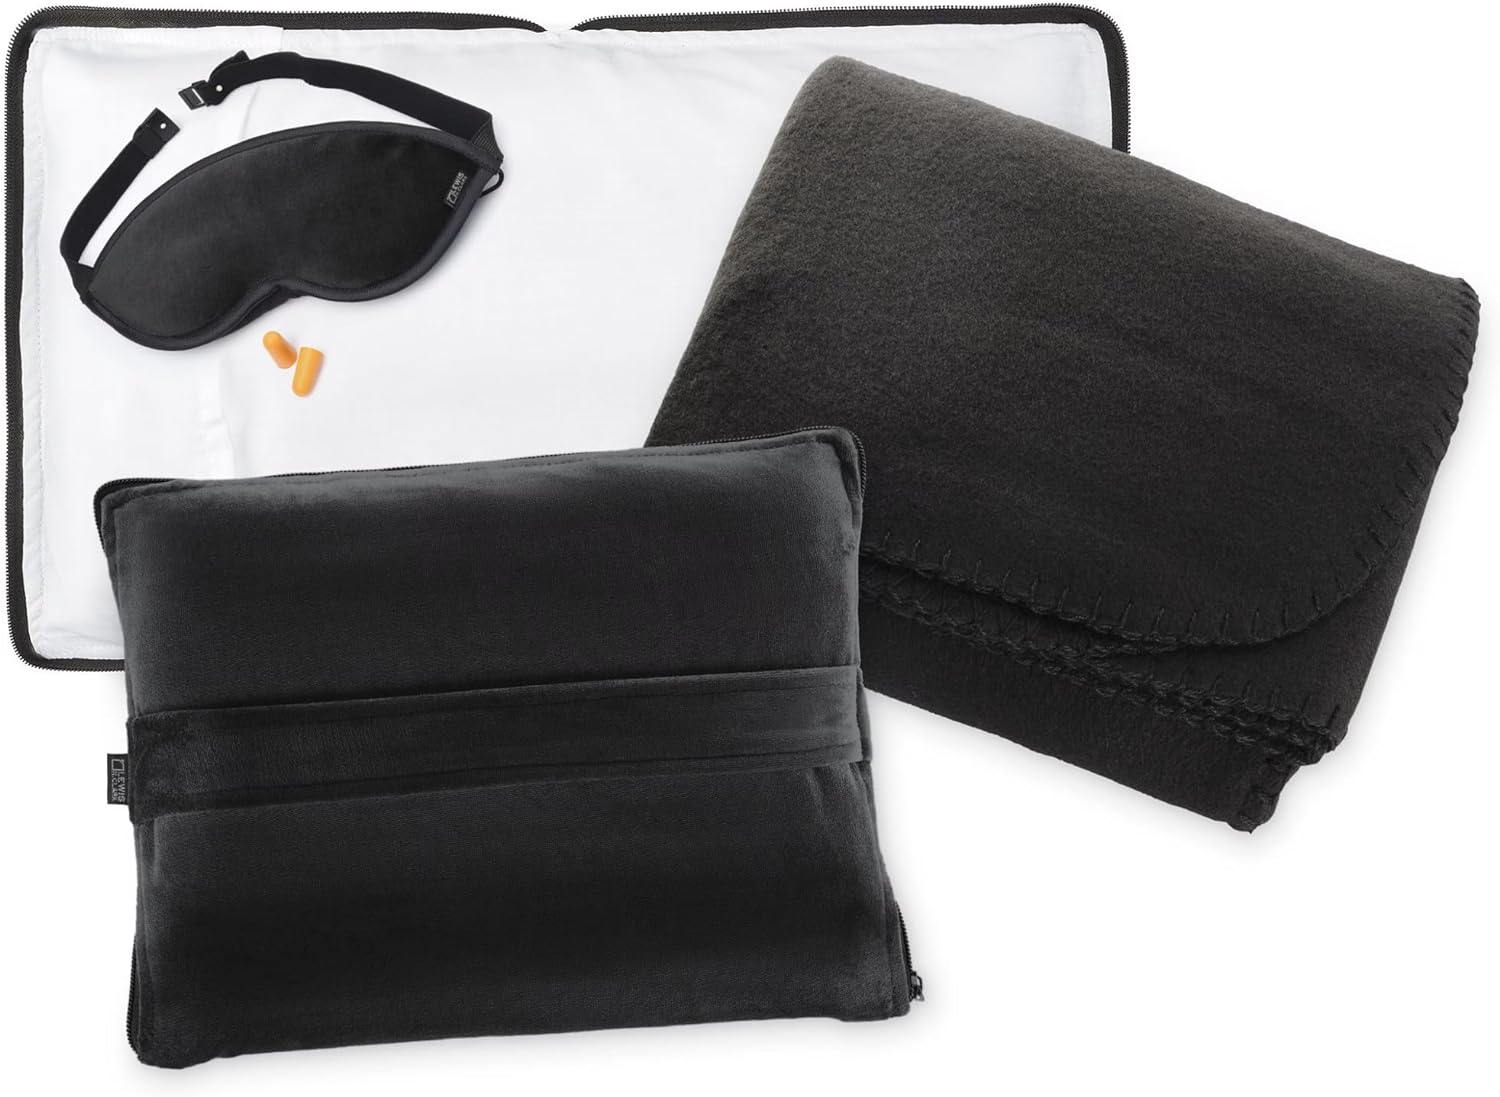 Lewis N. Clark Ultimate Comfort Set + Portable Travel Kit for Airplane, Includes Inflatable Pillow + Zippered Carrying Case, Cozy Fleece Blanket, Eye Mask for Sleeping & Foam Ear Plugs, Black